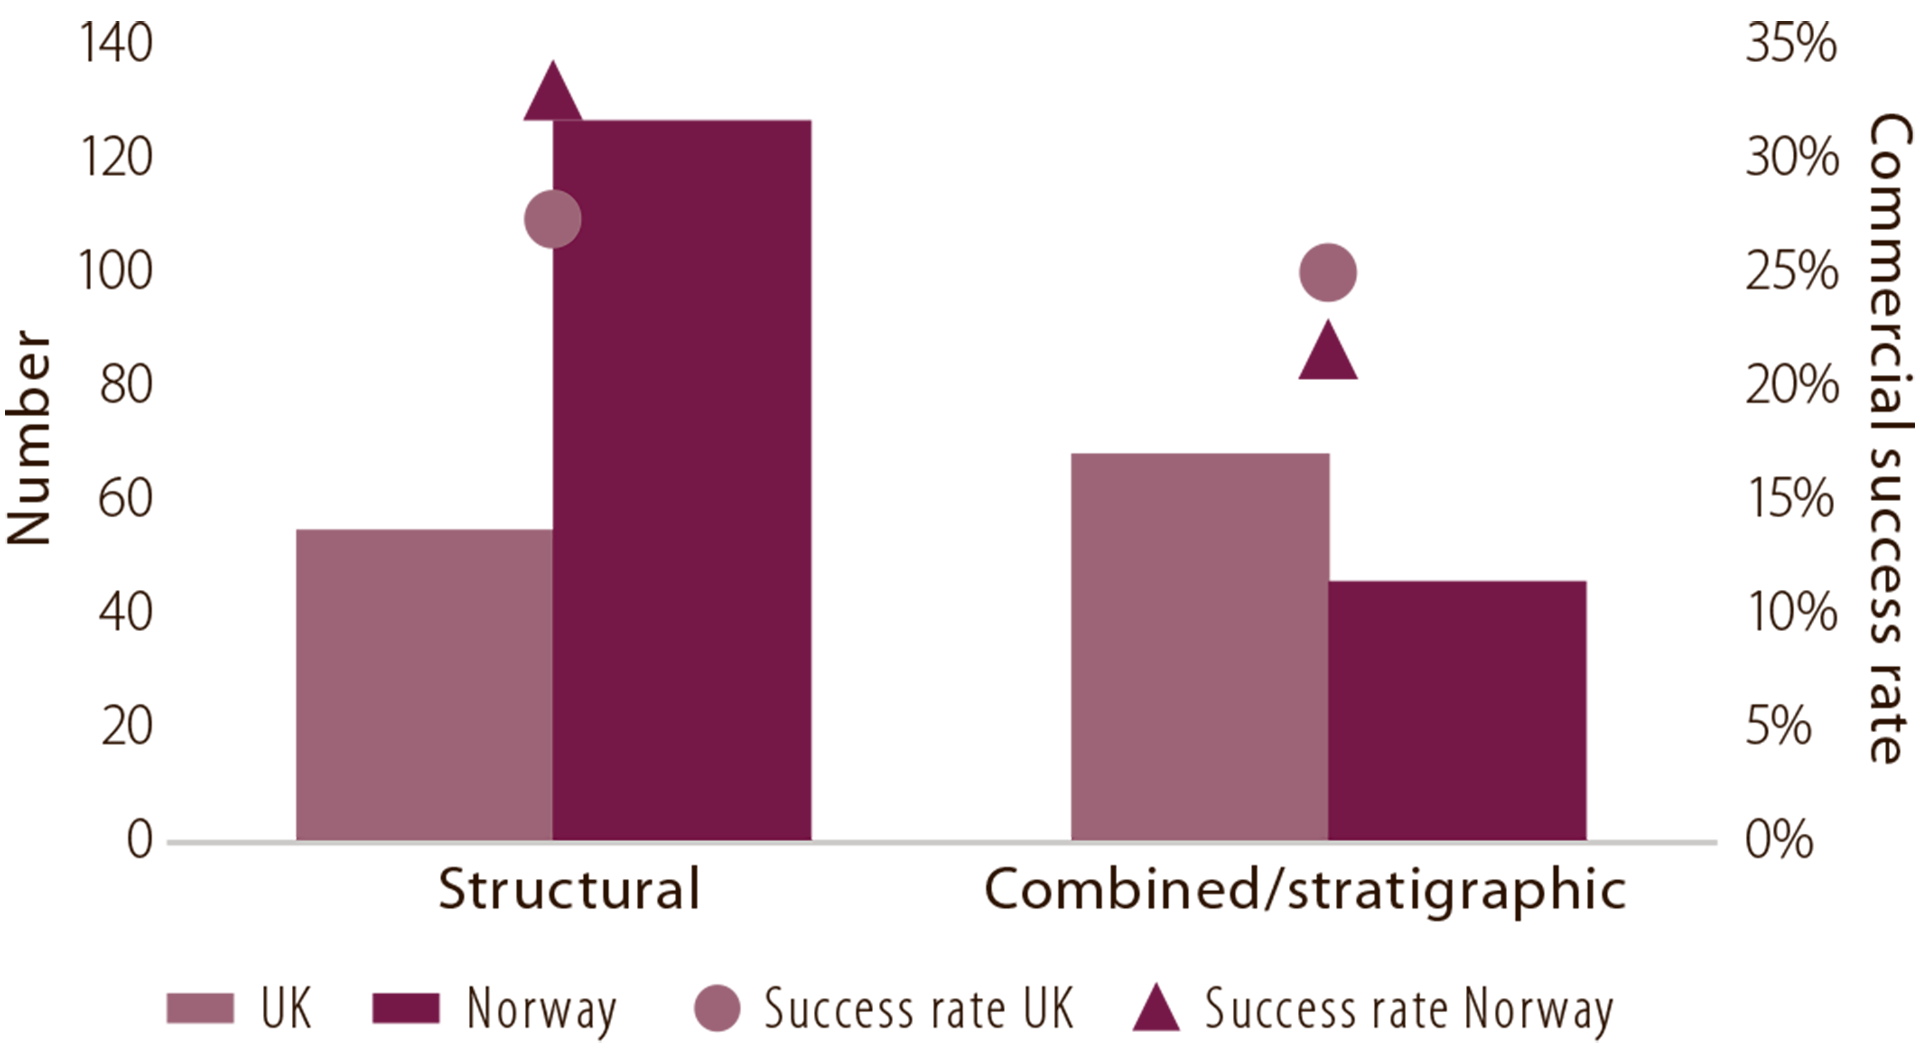 Figure 6.6 Trap types and commercial success rates in Norway and the UK, 2008-17. Source: Westwood